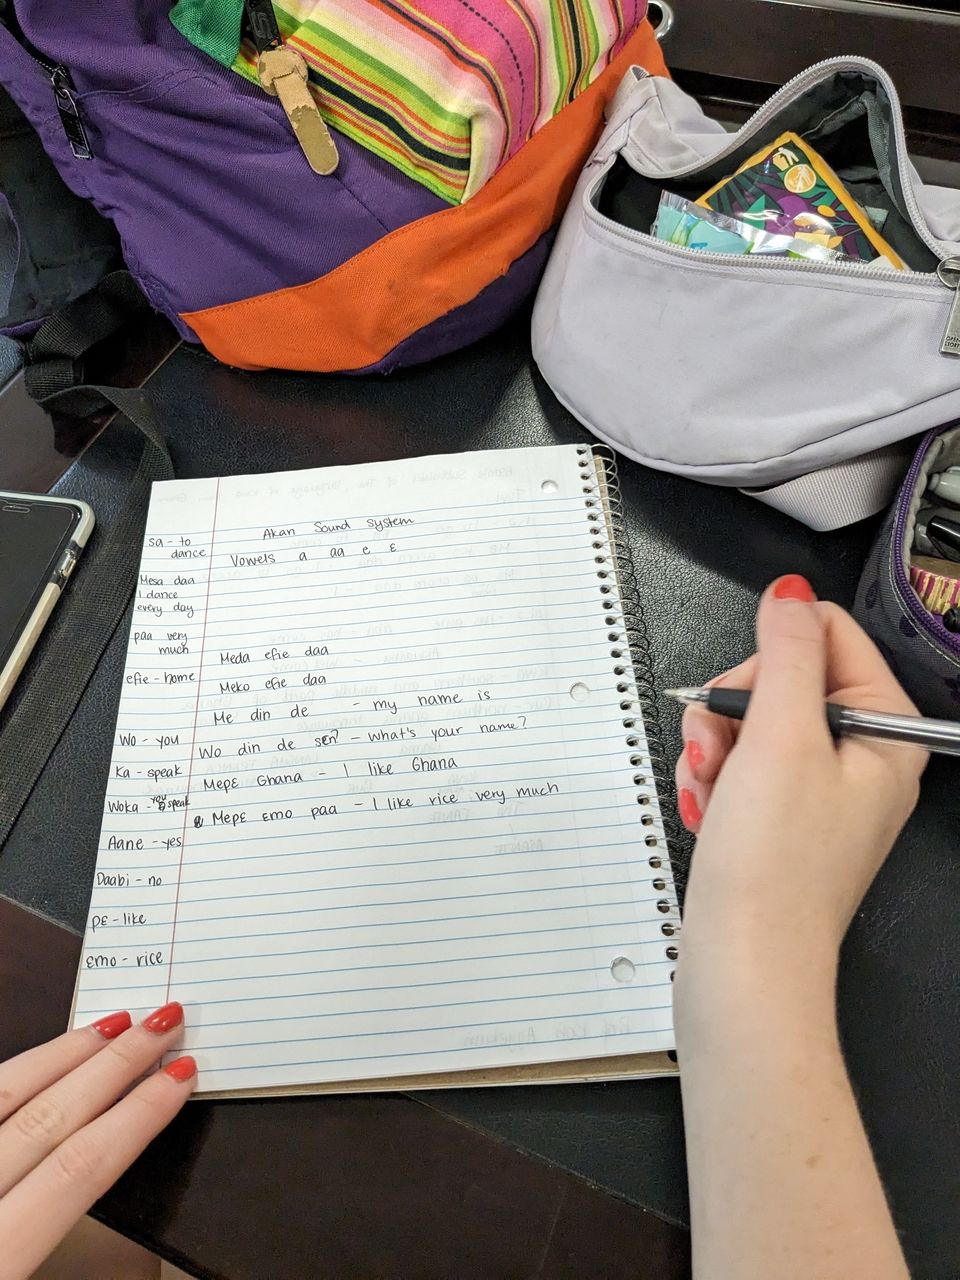 This is a photo of a page in a student's notebook. The page has some Twi words and phrases the student has put down from the first day of their Twi language lessons.